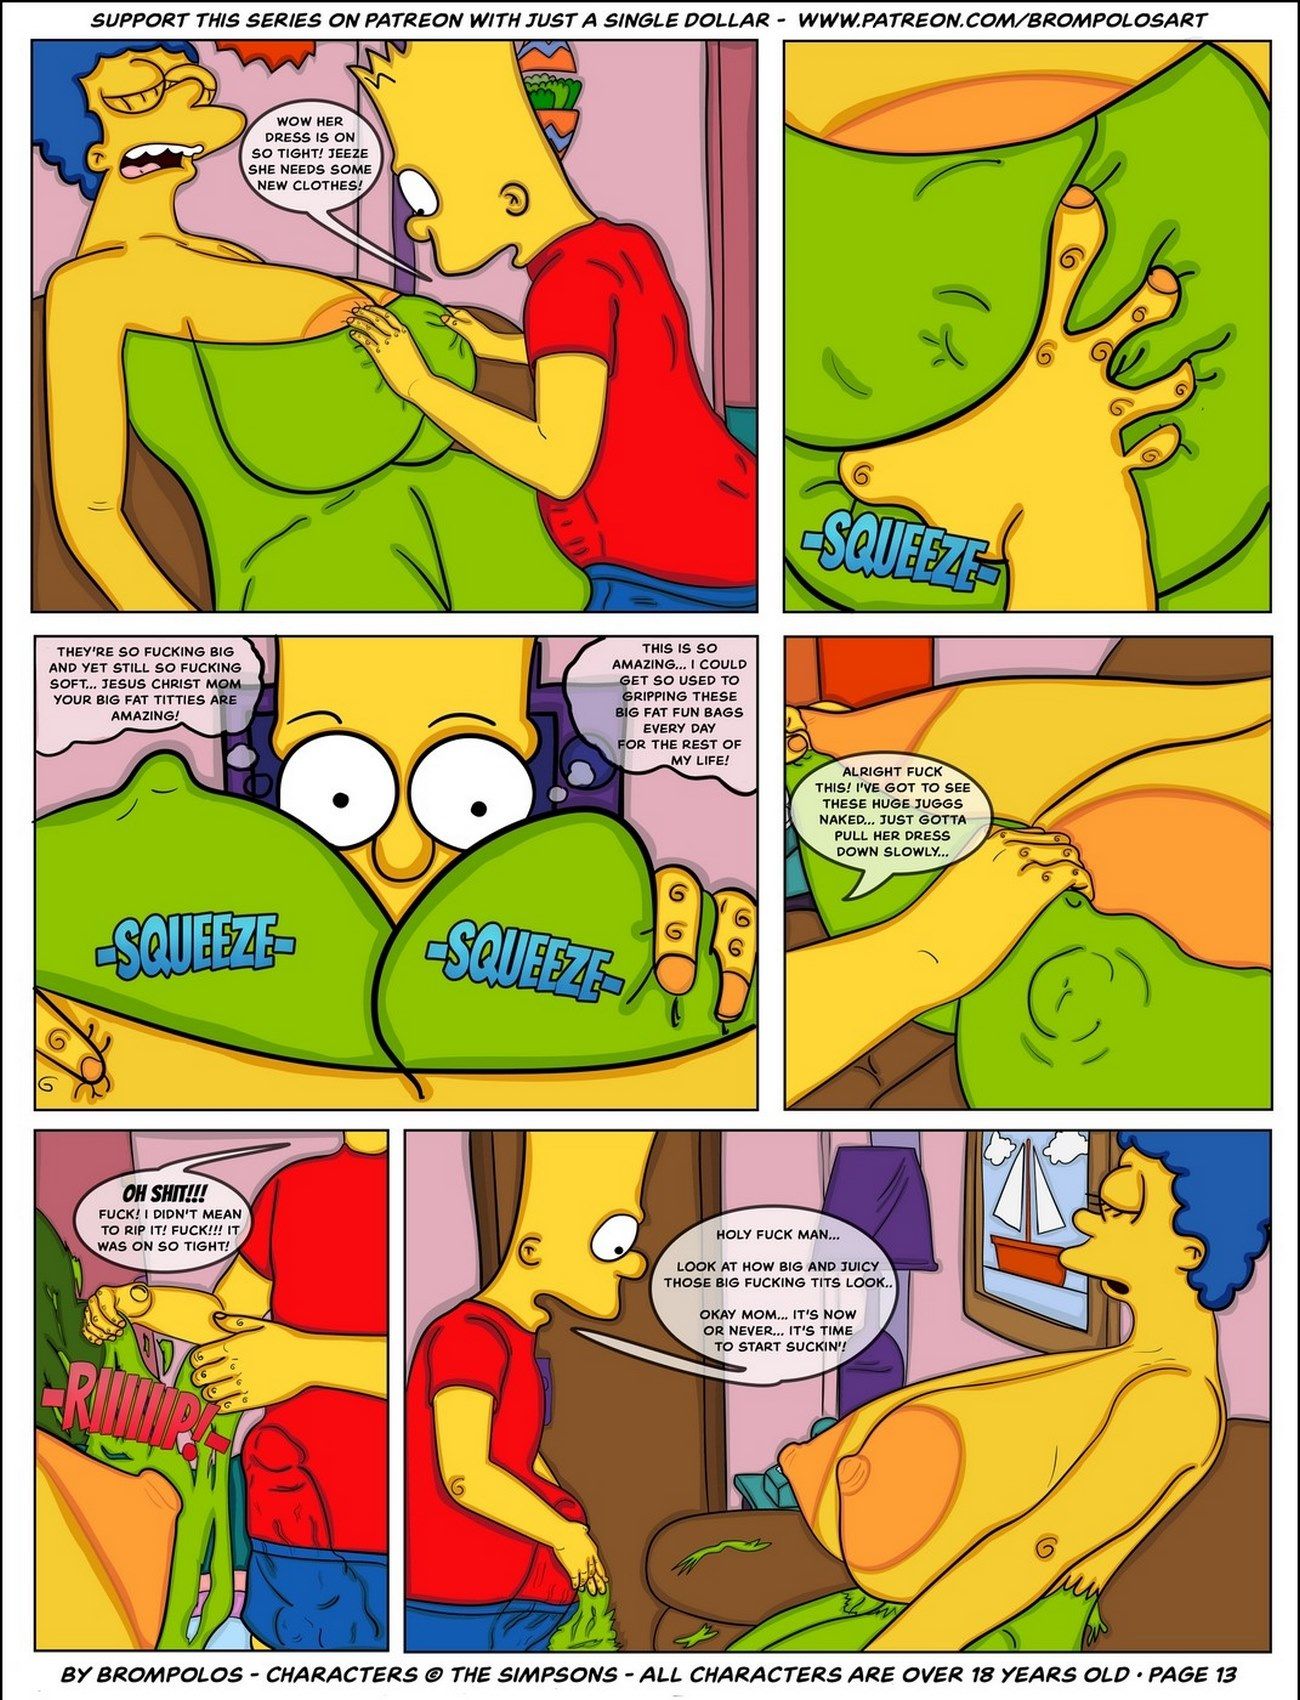 Brompolos - The Simpsons are Sexenteins page 19